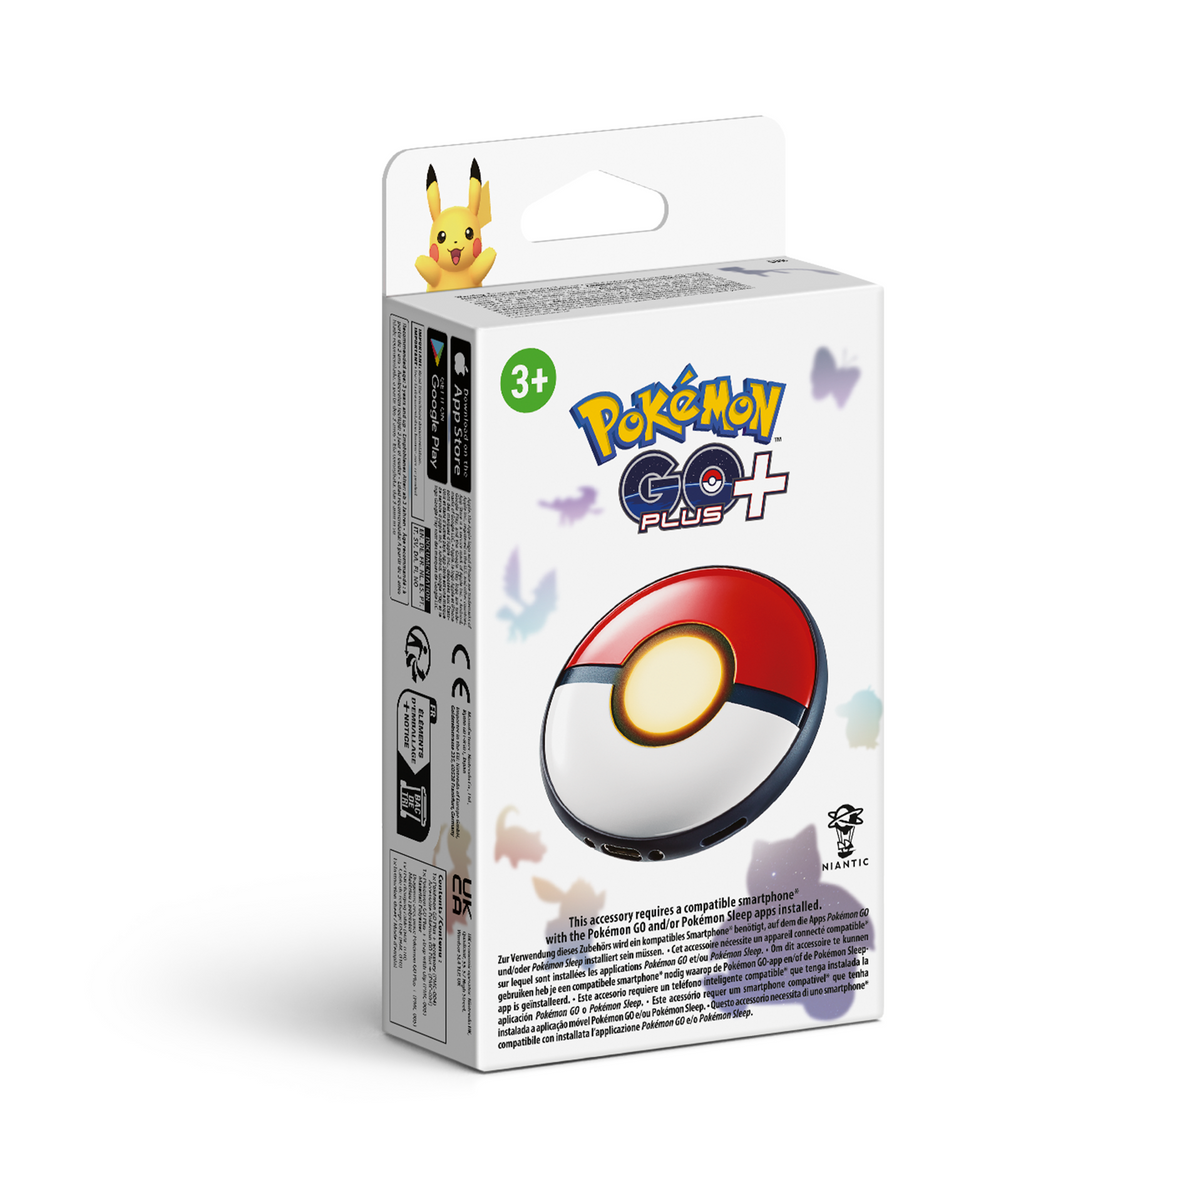 Pokémon GO Plus, PokéBall Plus, Pokémon GO Plus + - What's the